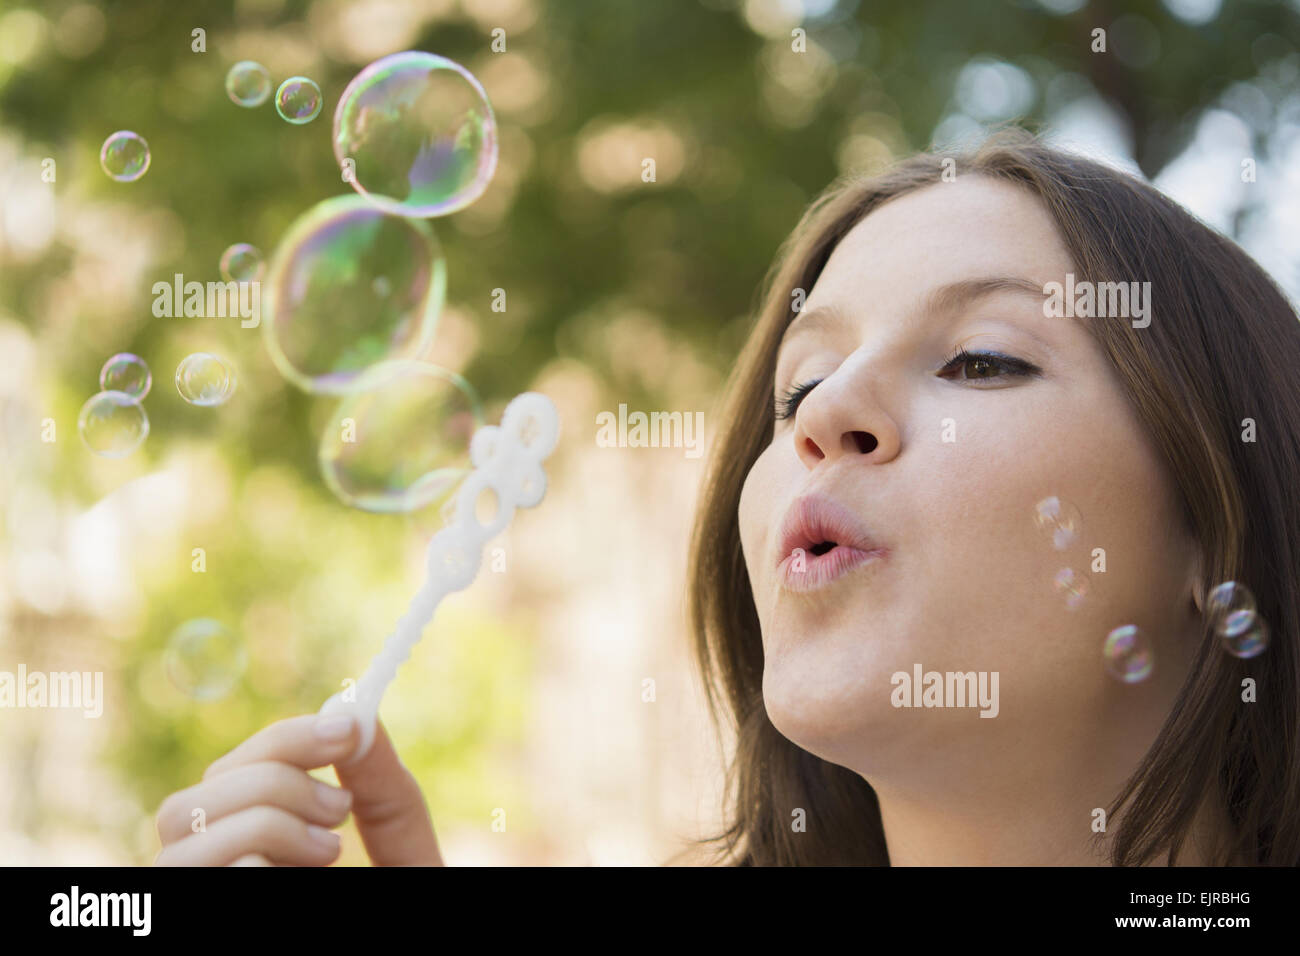 Close up of Caucasian woman blowing bubbles outdoors Stock Photo